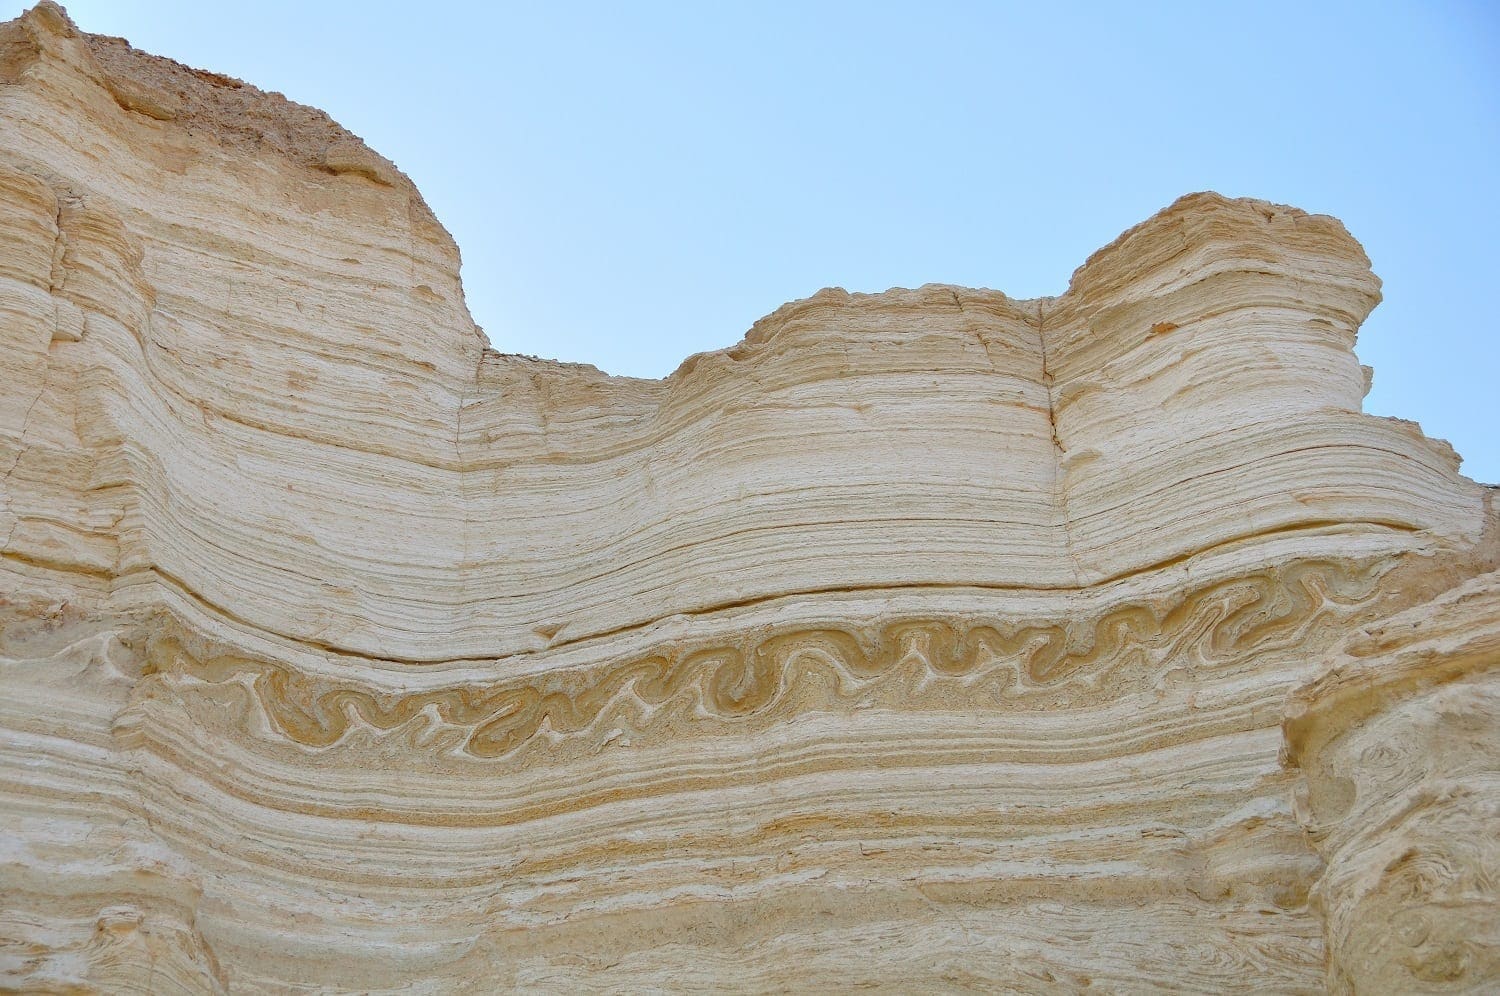 Sedimentary layers in Israel showing the serpentine folding an earthquake caused: ID 22433417 © Hugoht | Dreamstime.com